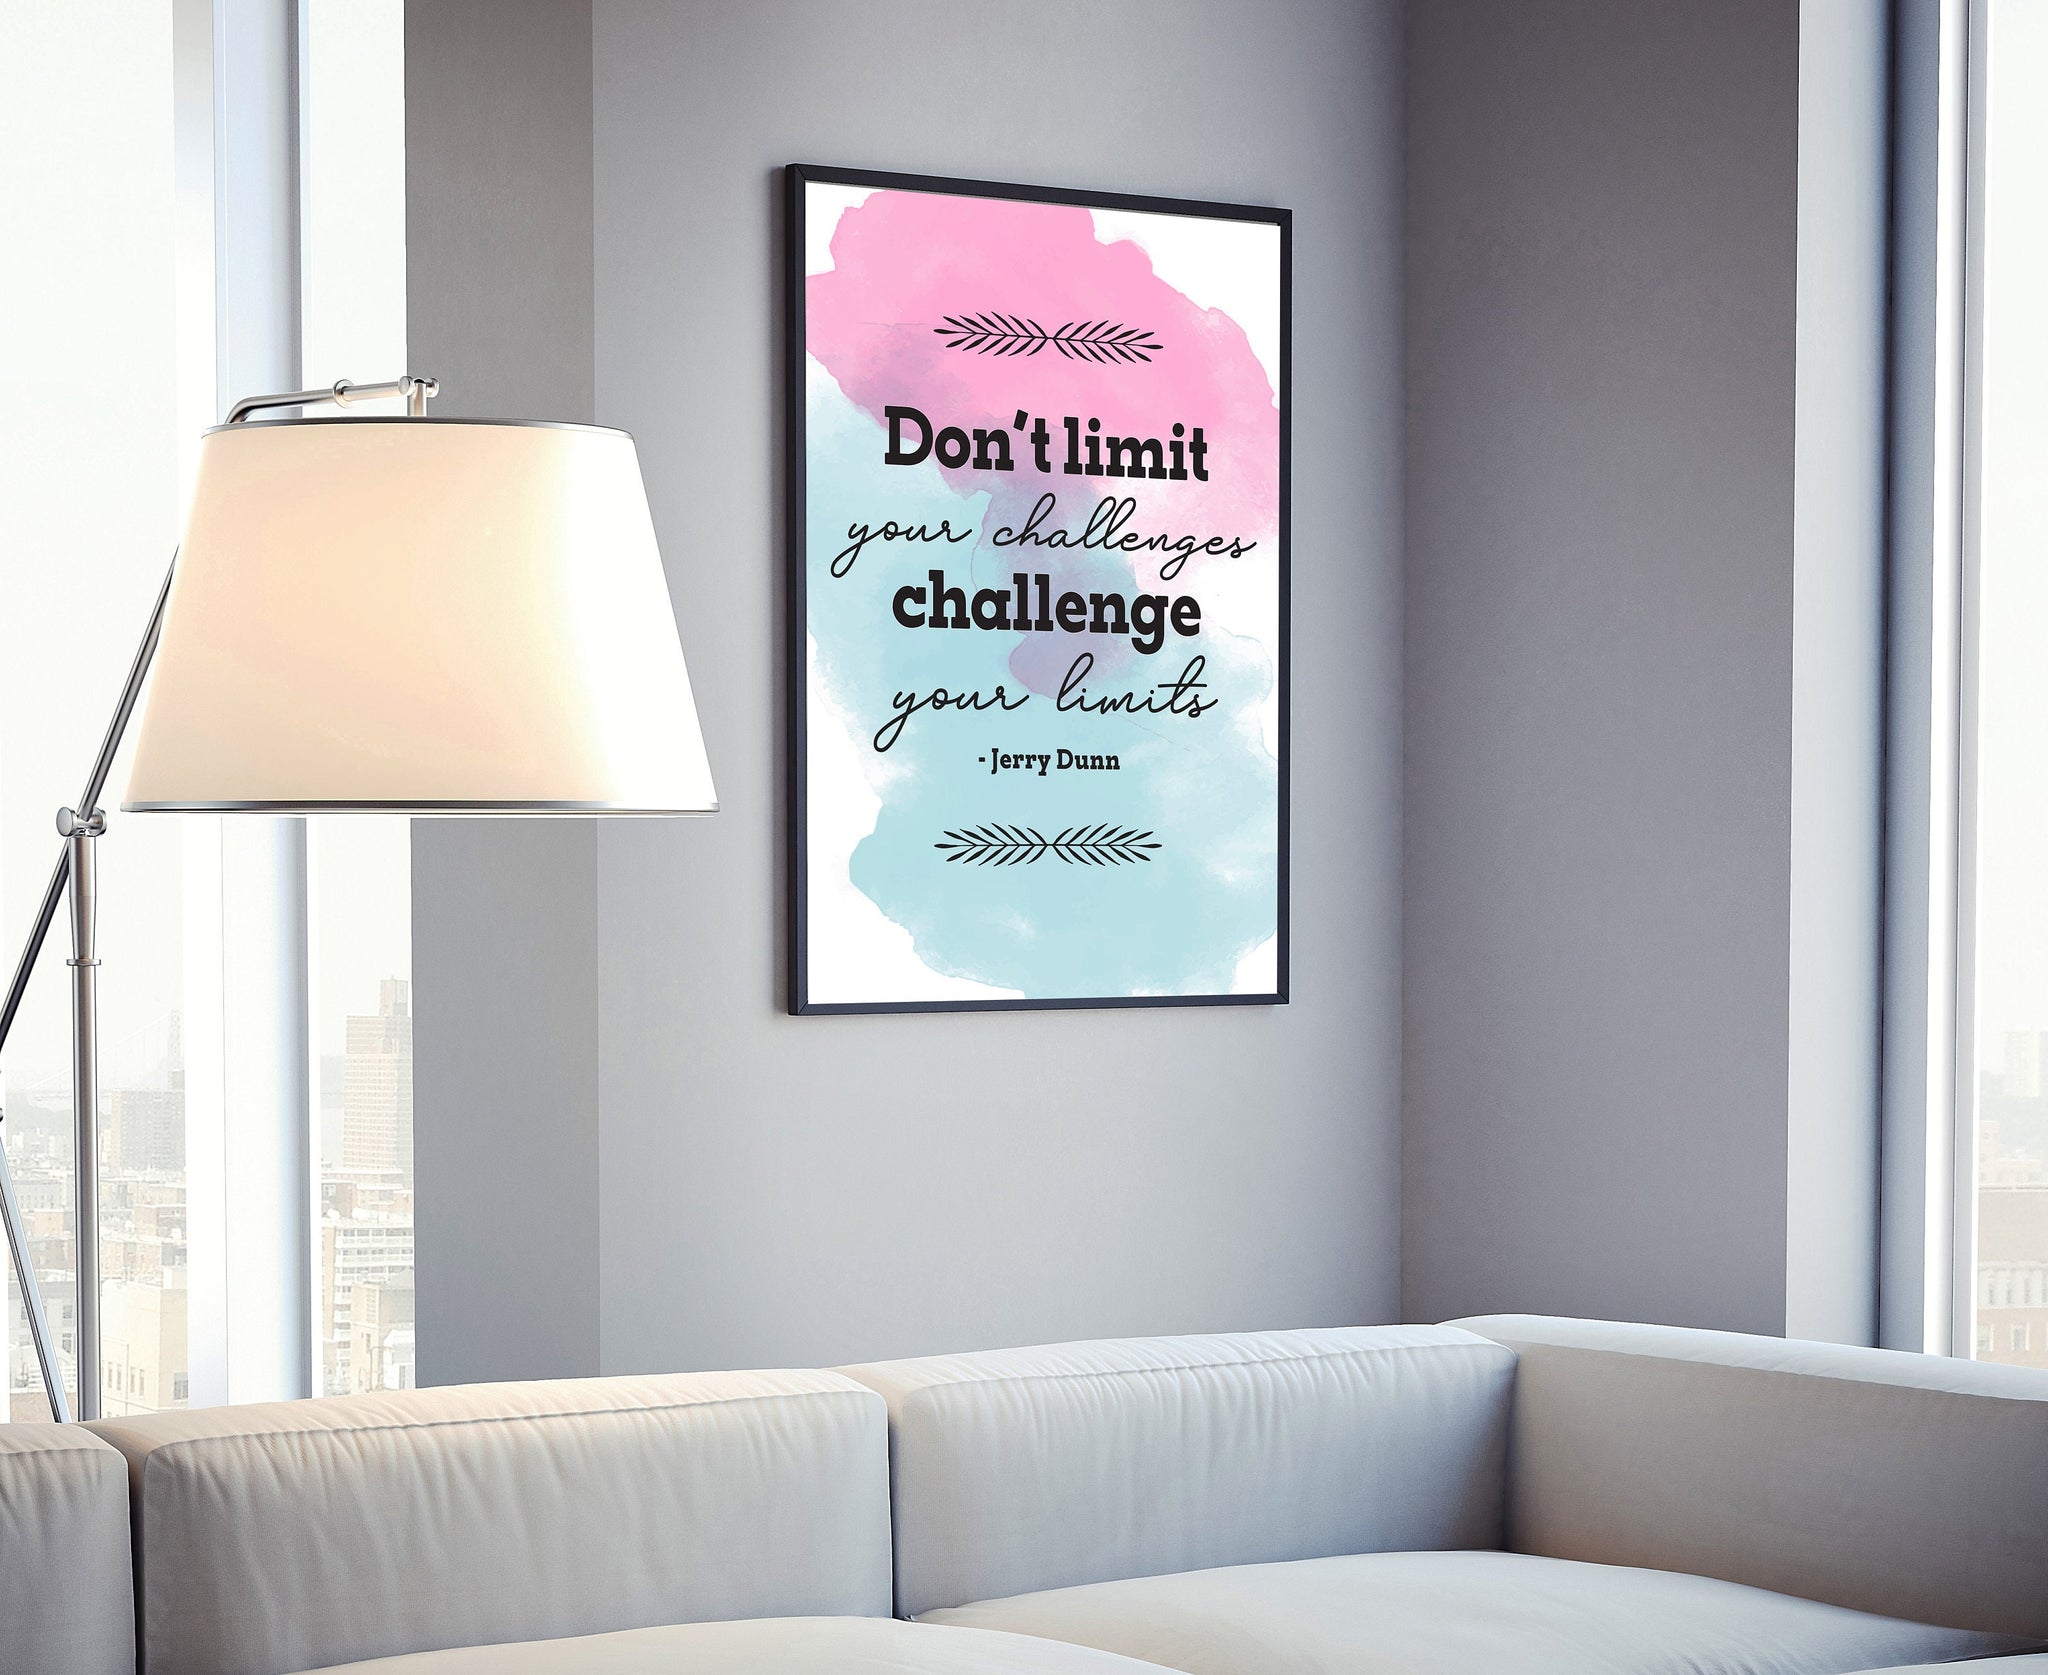 Don't limit your challenges.., Poster Prints, Home wall Arts, Dorm Rooms wall art, Office wall decor, Motivational quotes, Home gifts, Quote